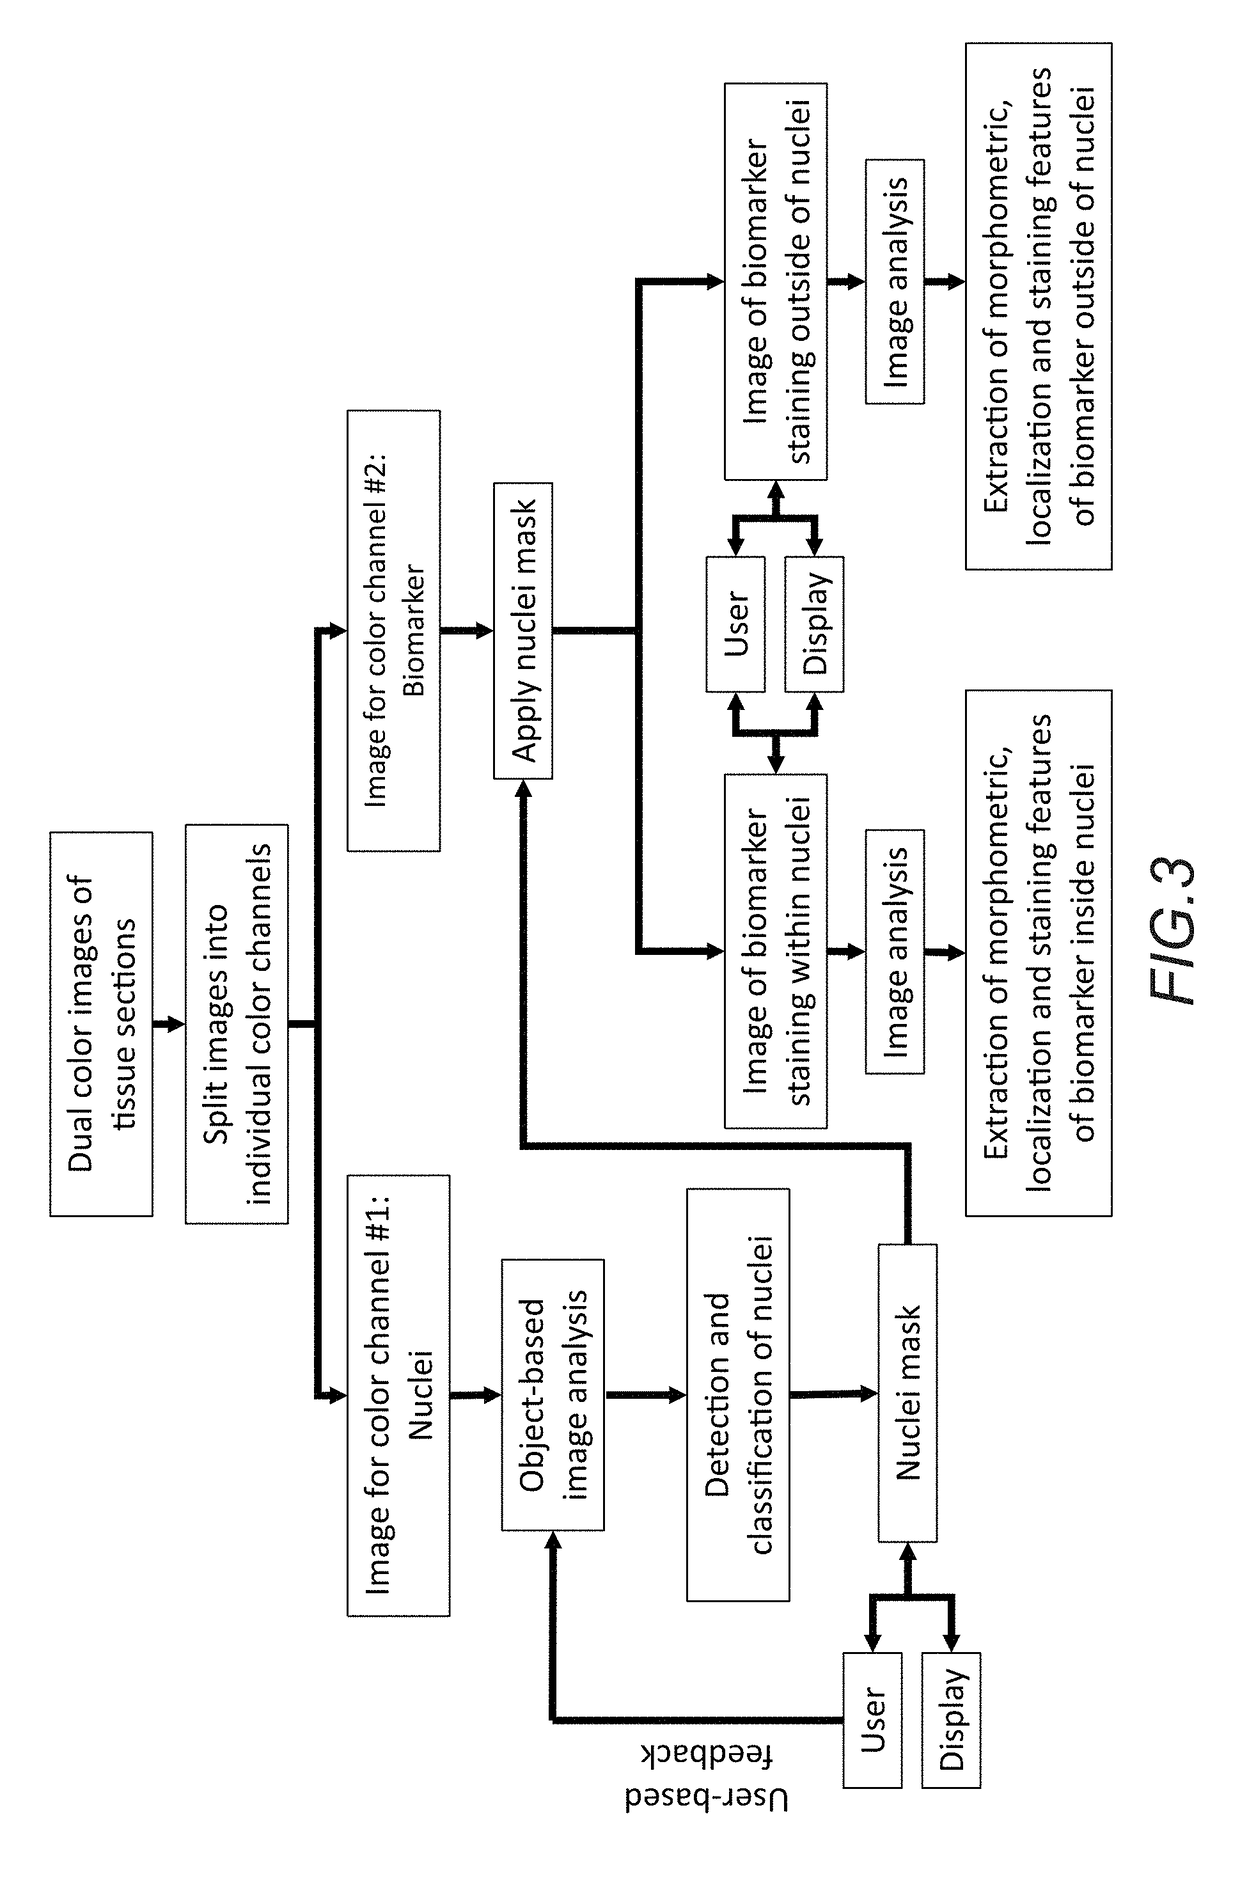 Methods for quantitative assessment of mononuclear cells in muscle tissue sections